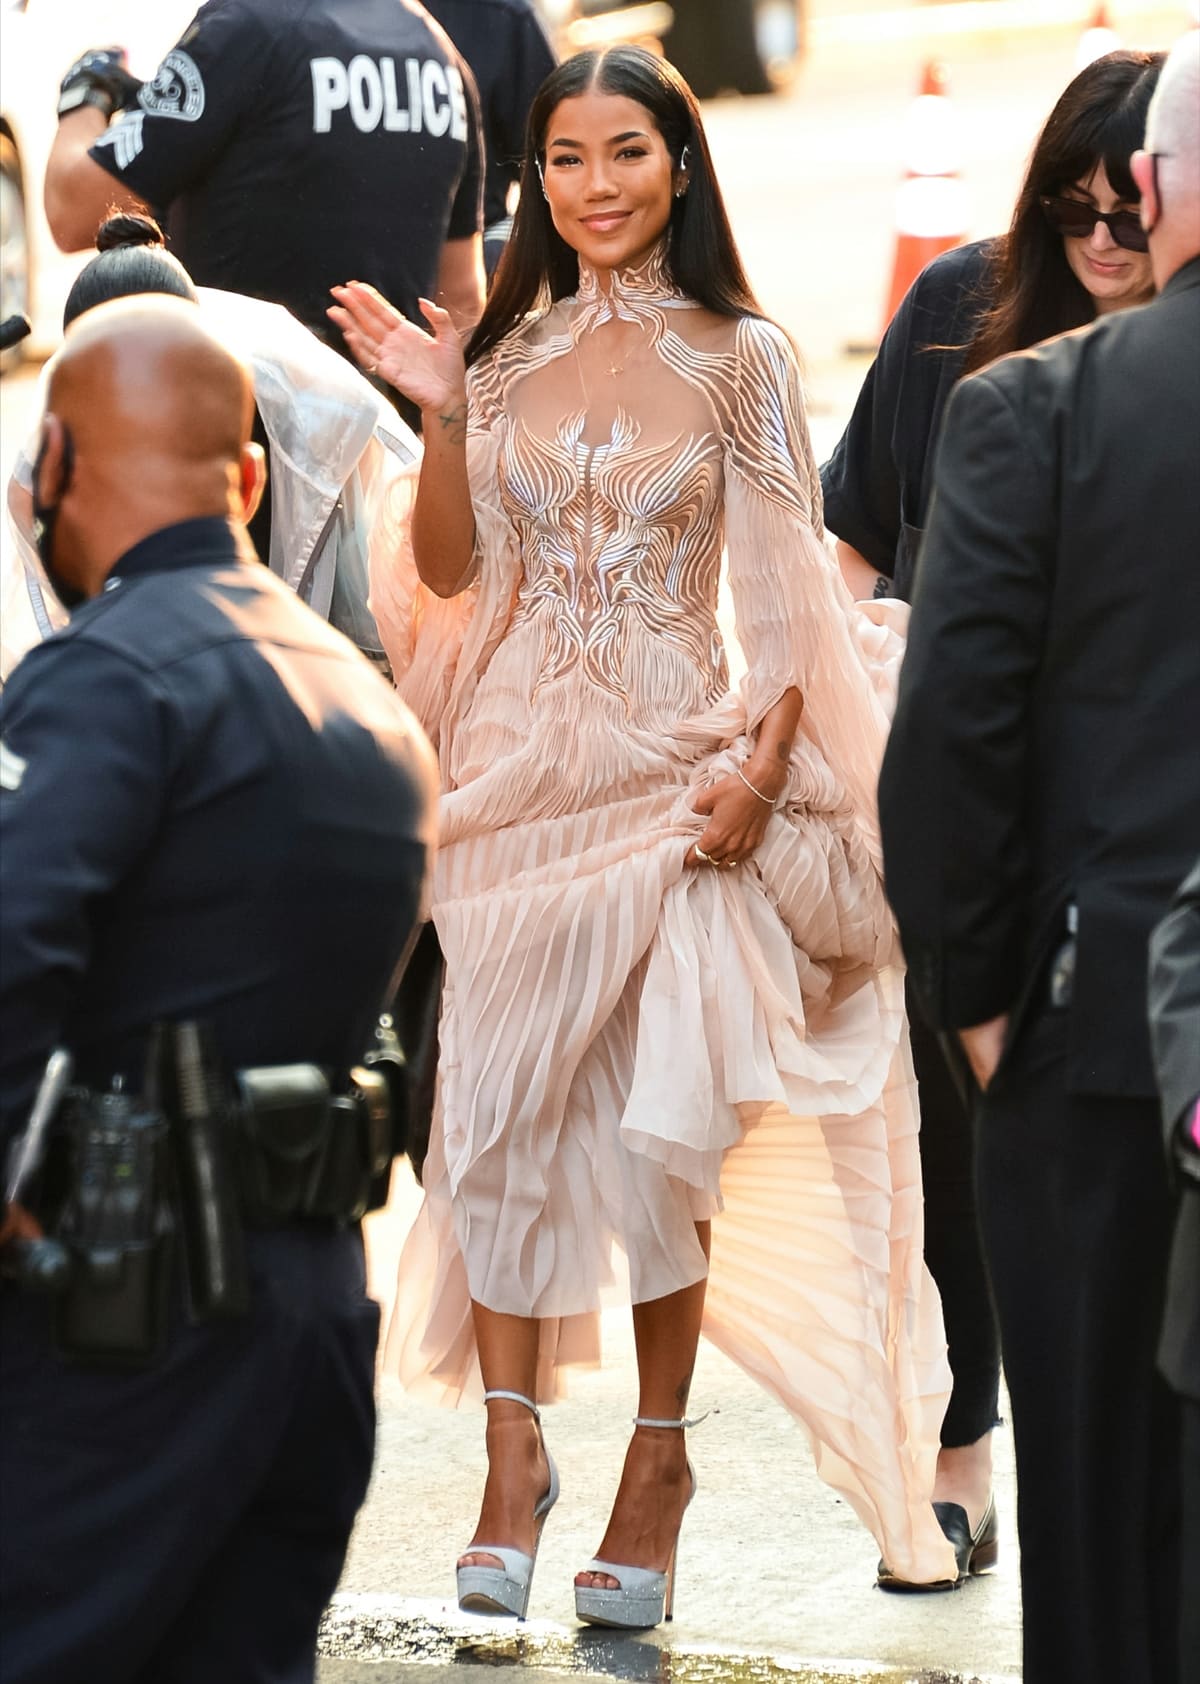 Jhene Aiko in an Iris Van Herpen Spring 2021 Haute Couture dress at the 'Shang-Chi and the Legend of the Ten Rings' World Premiere